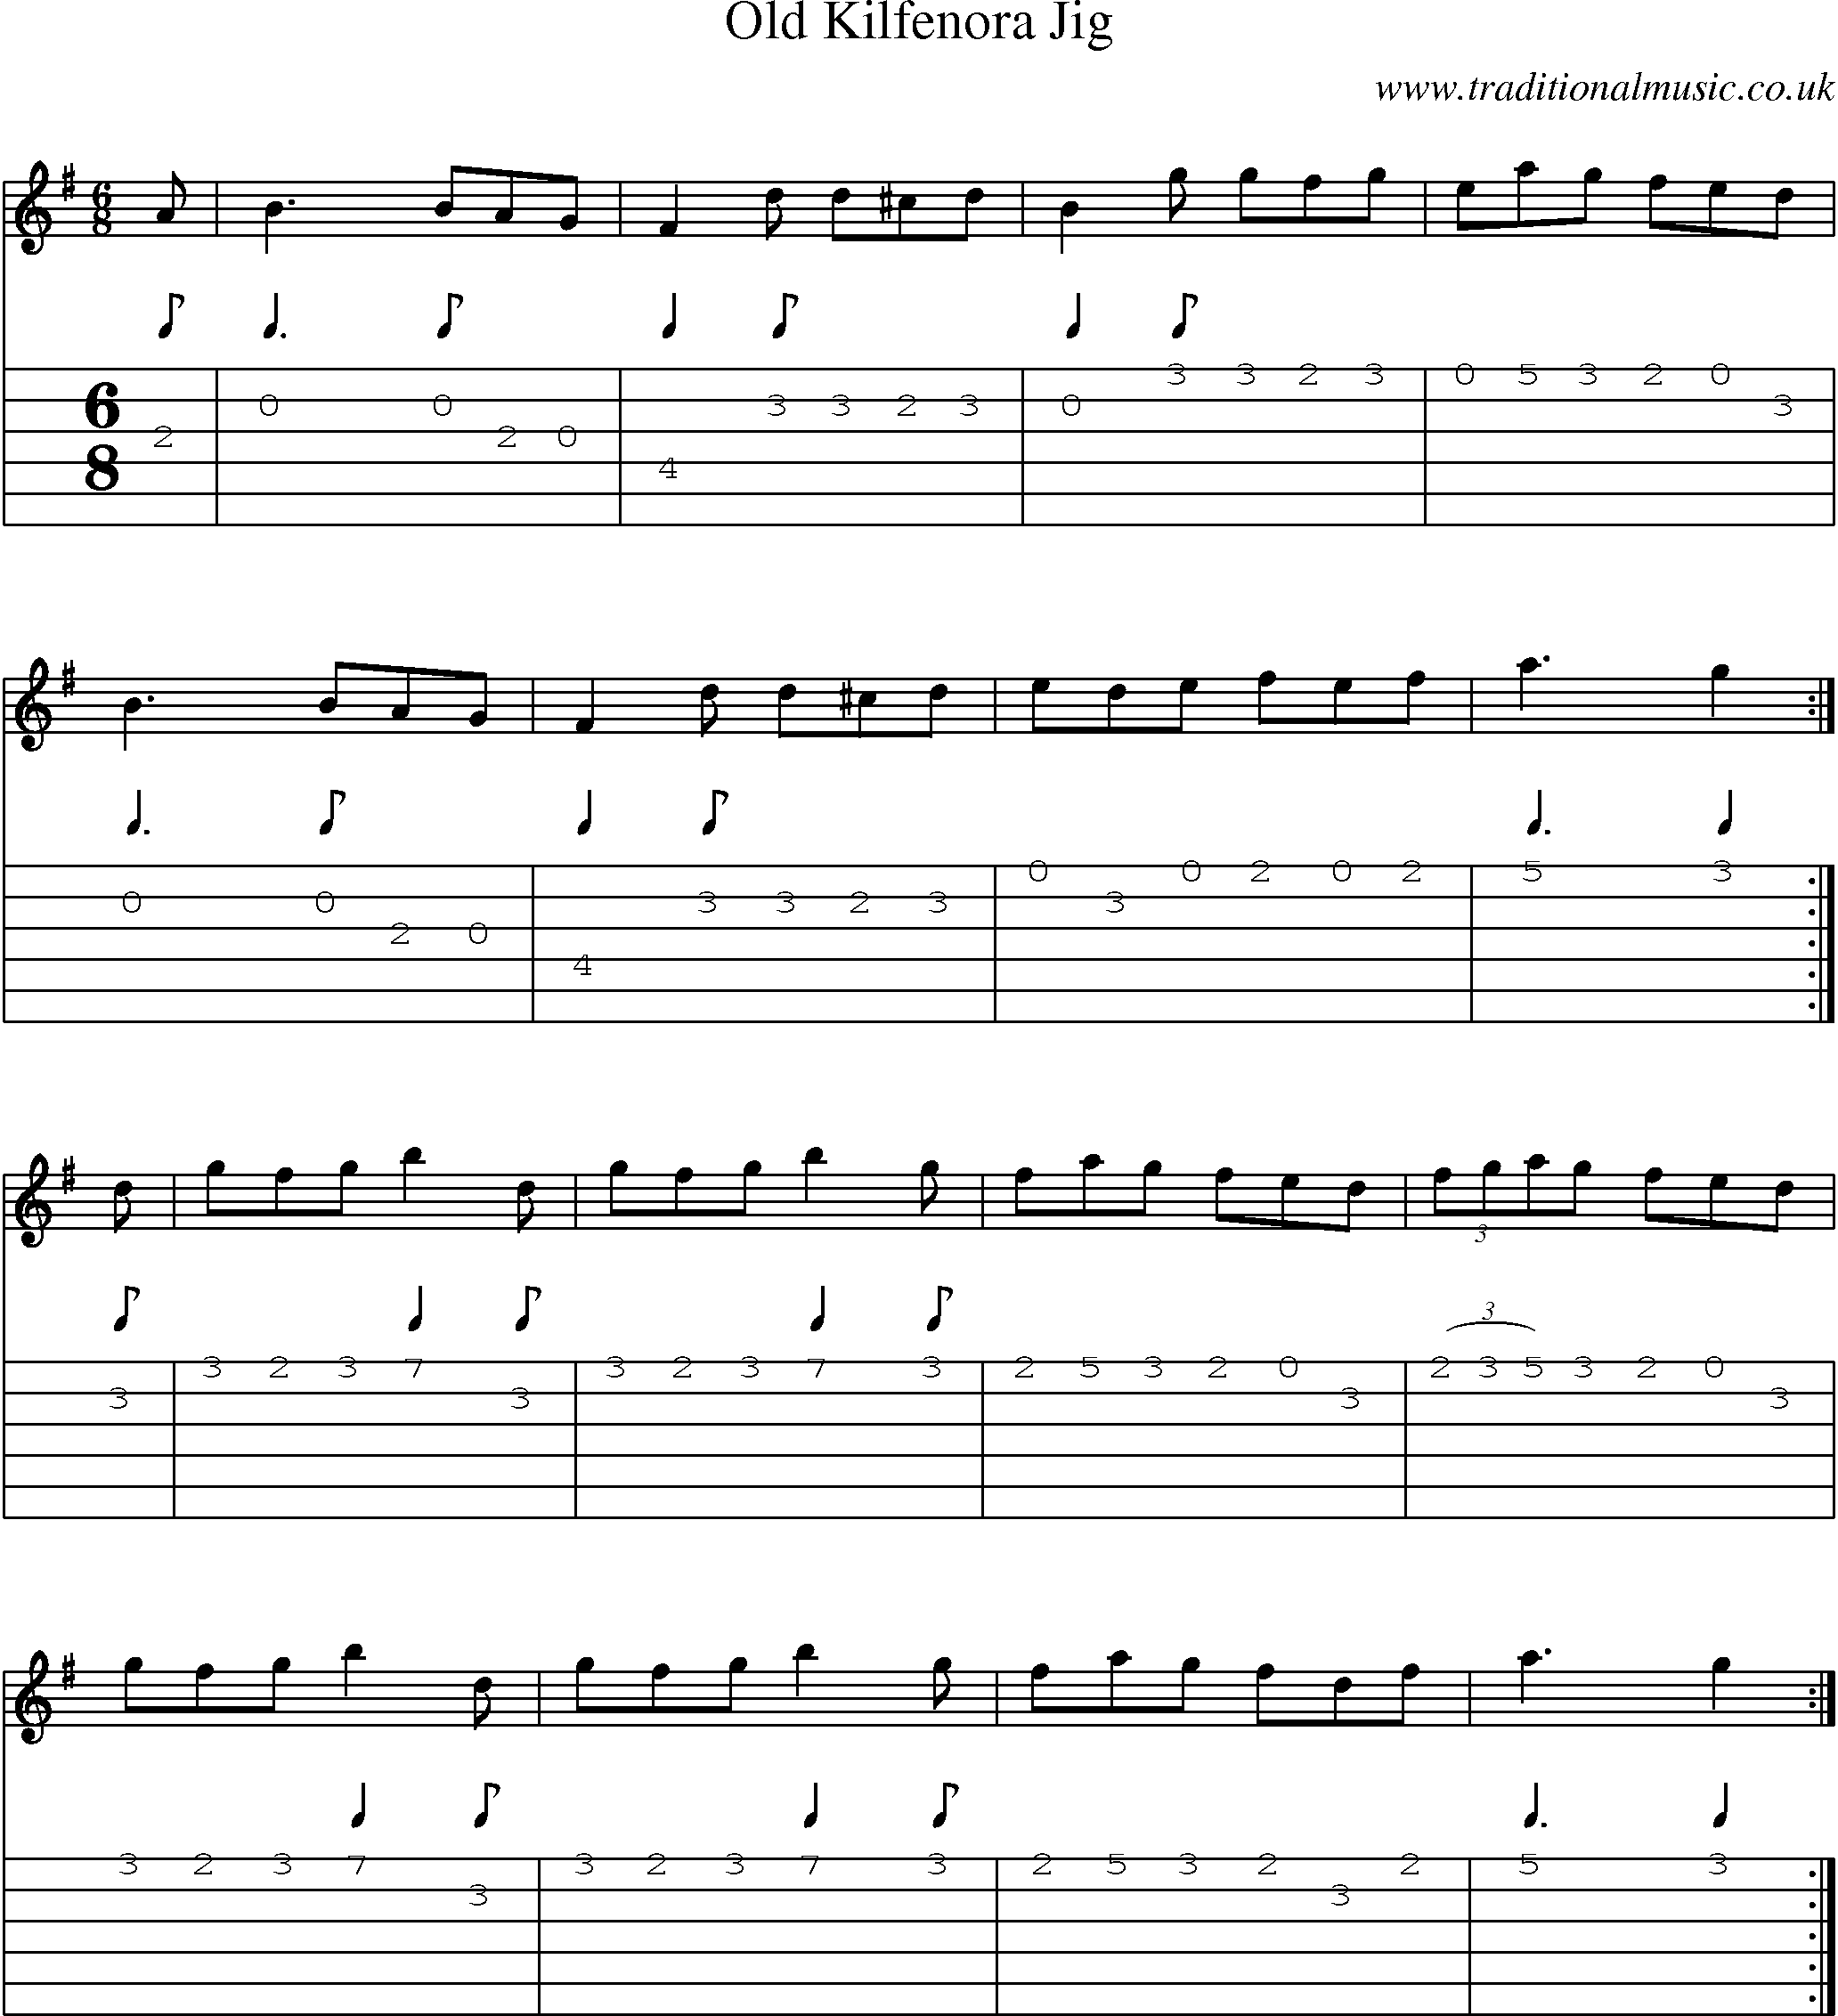 Music Score and Guitar Tabs for Old Kilfenora Jig